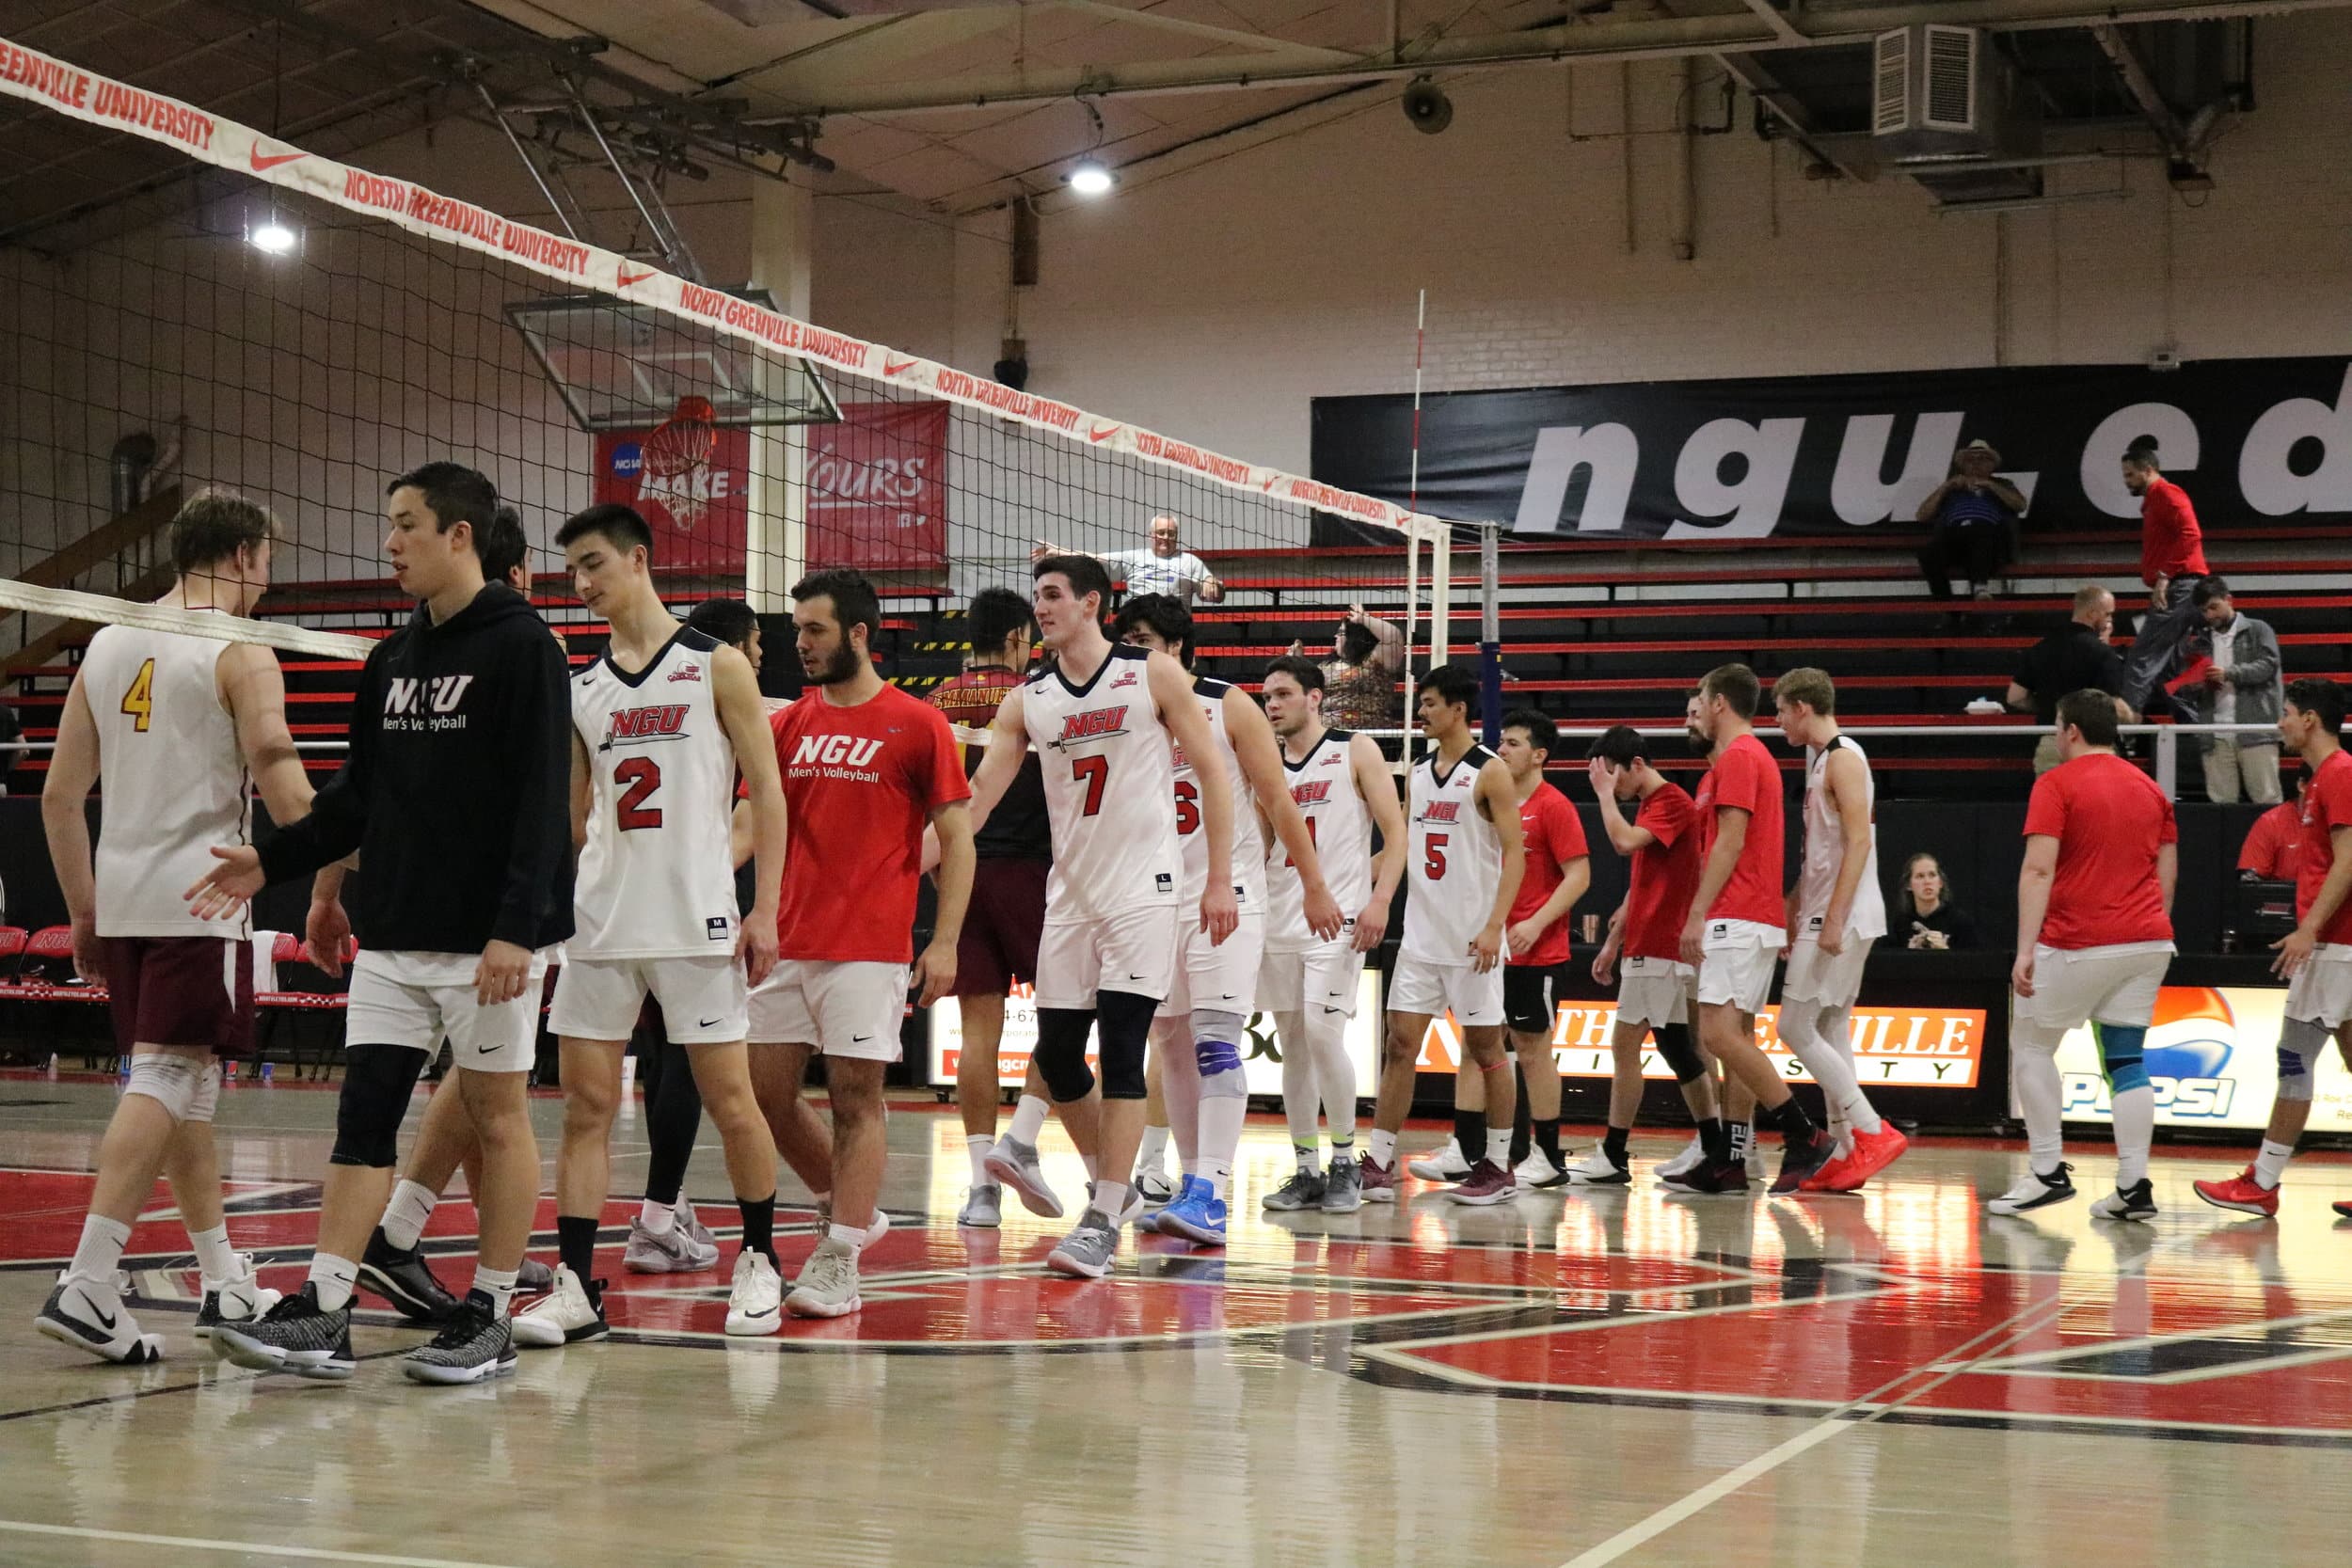 The Crusaders shake hands with the Lions after they defeated the Lions 25-21 in the third and final set.